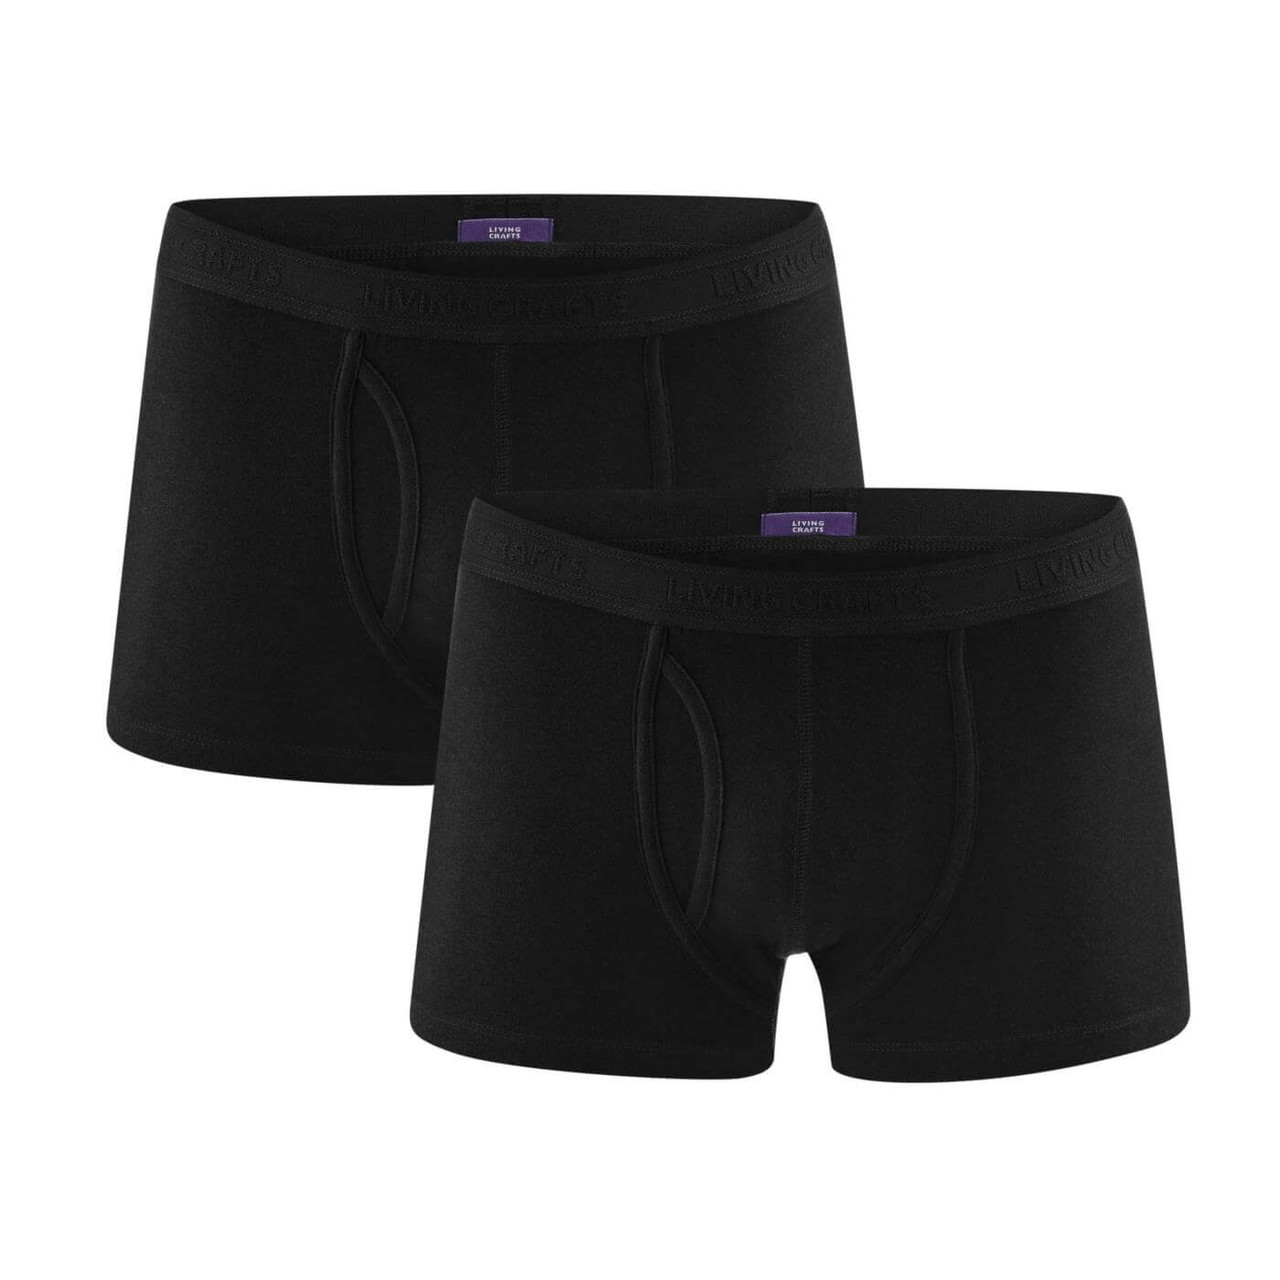 Organic Cotton Men Fitted Boxers Black Boxers Twin Pack - Living Crafts